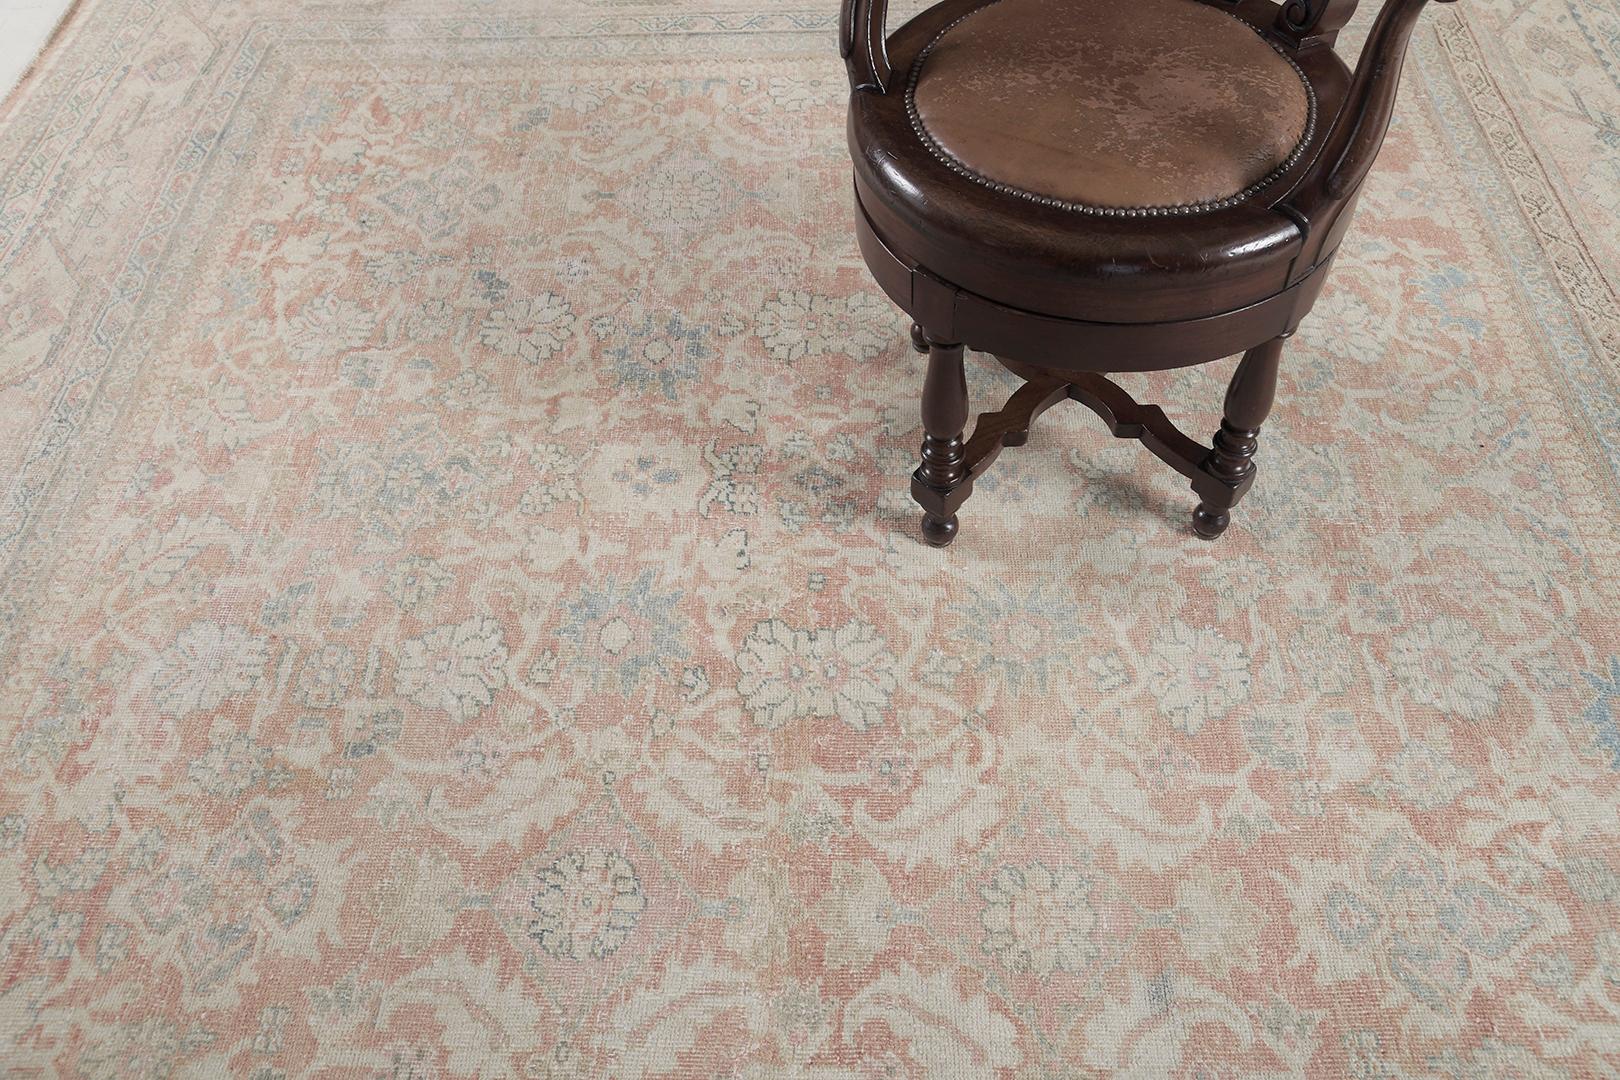 Behold the antique Persian Sultanabad rug that is impeccably woven with all-over botanical patterns in the amazing tones of cinnamon, dustry blue and sand. This enchanting rug brilliantly expresses timeless elegance through its aesthetic garden